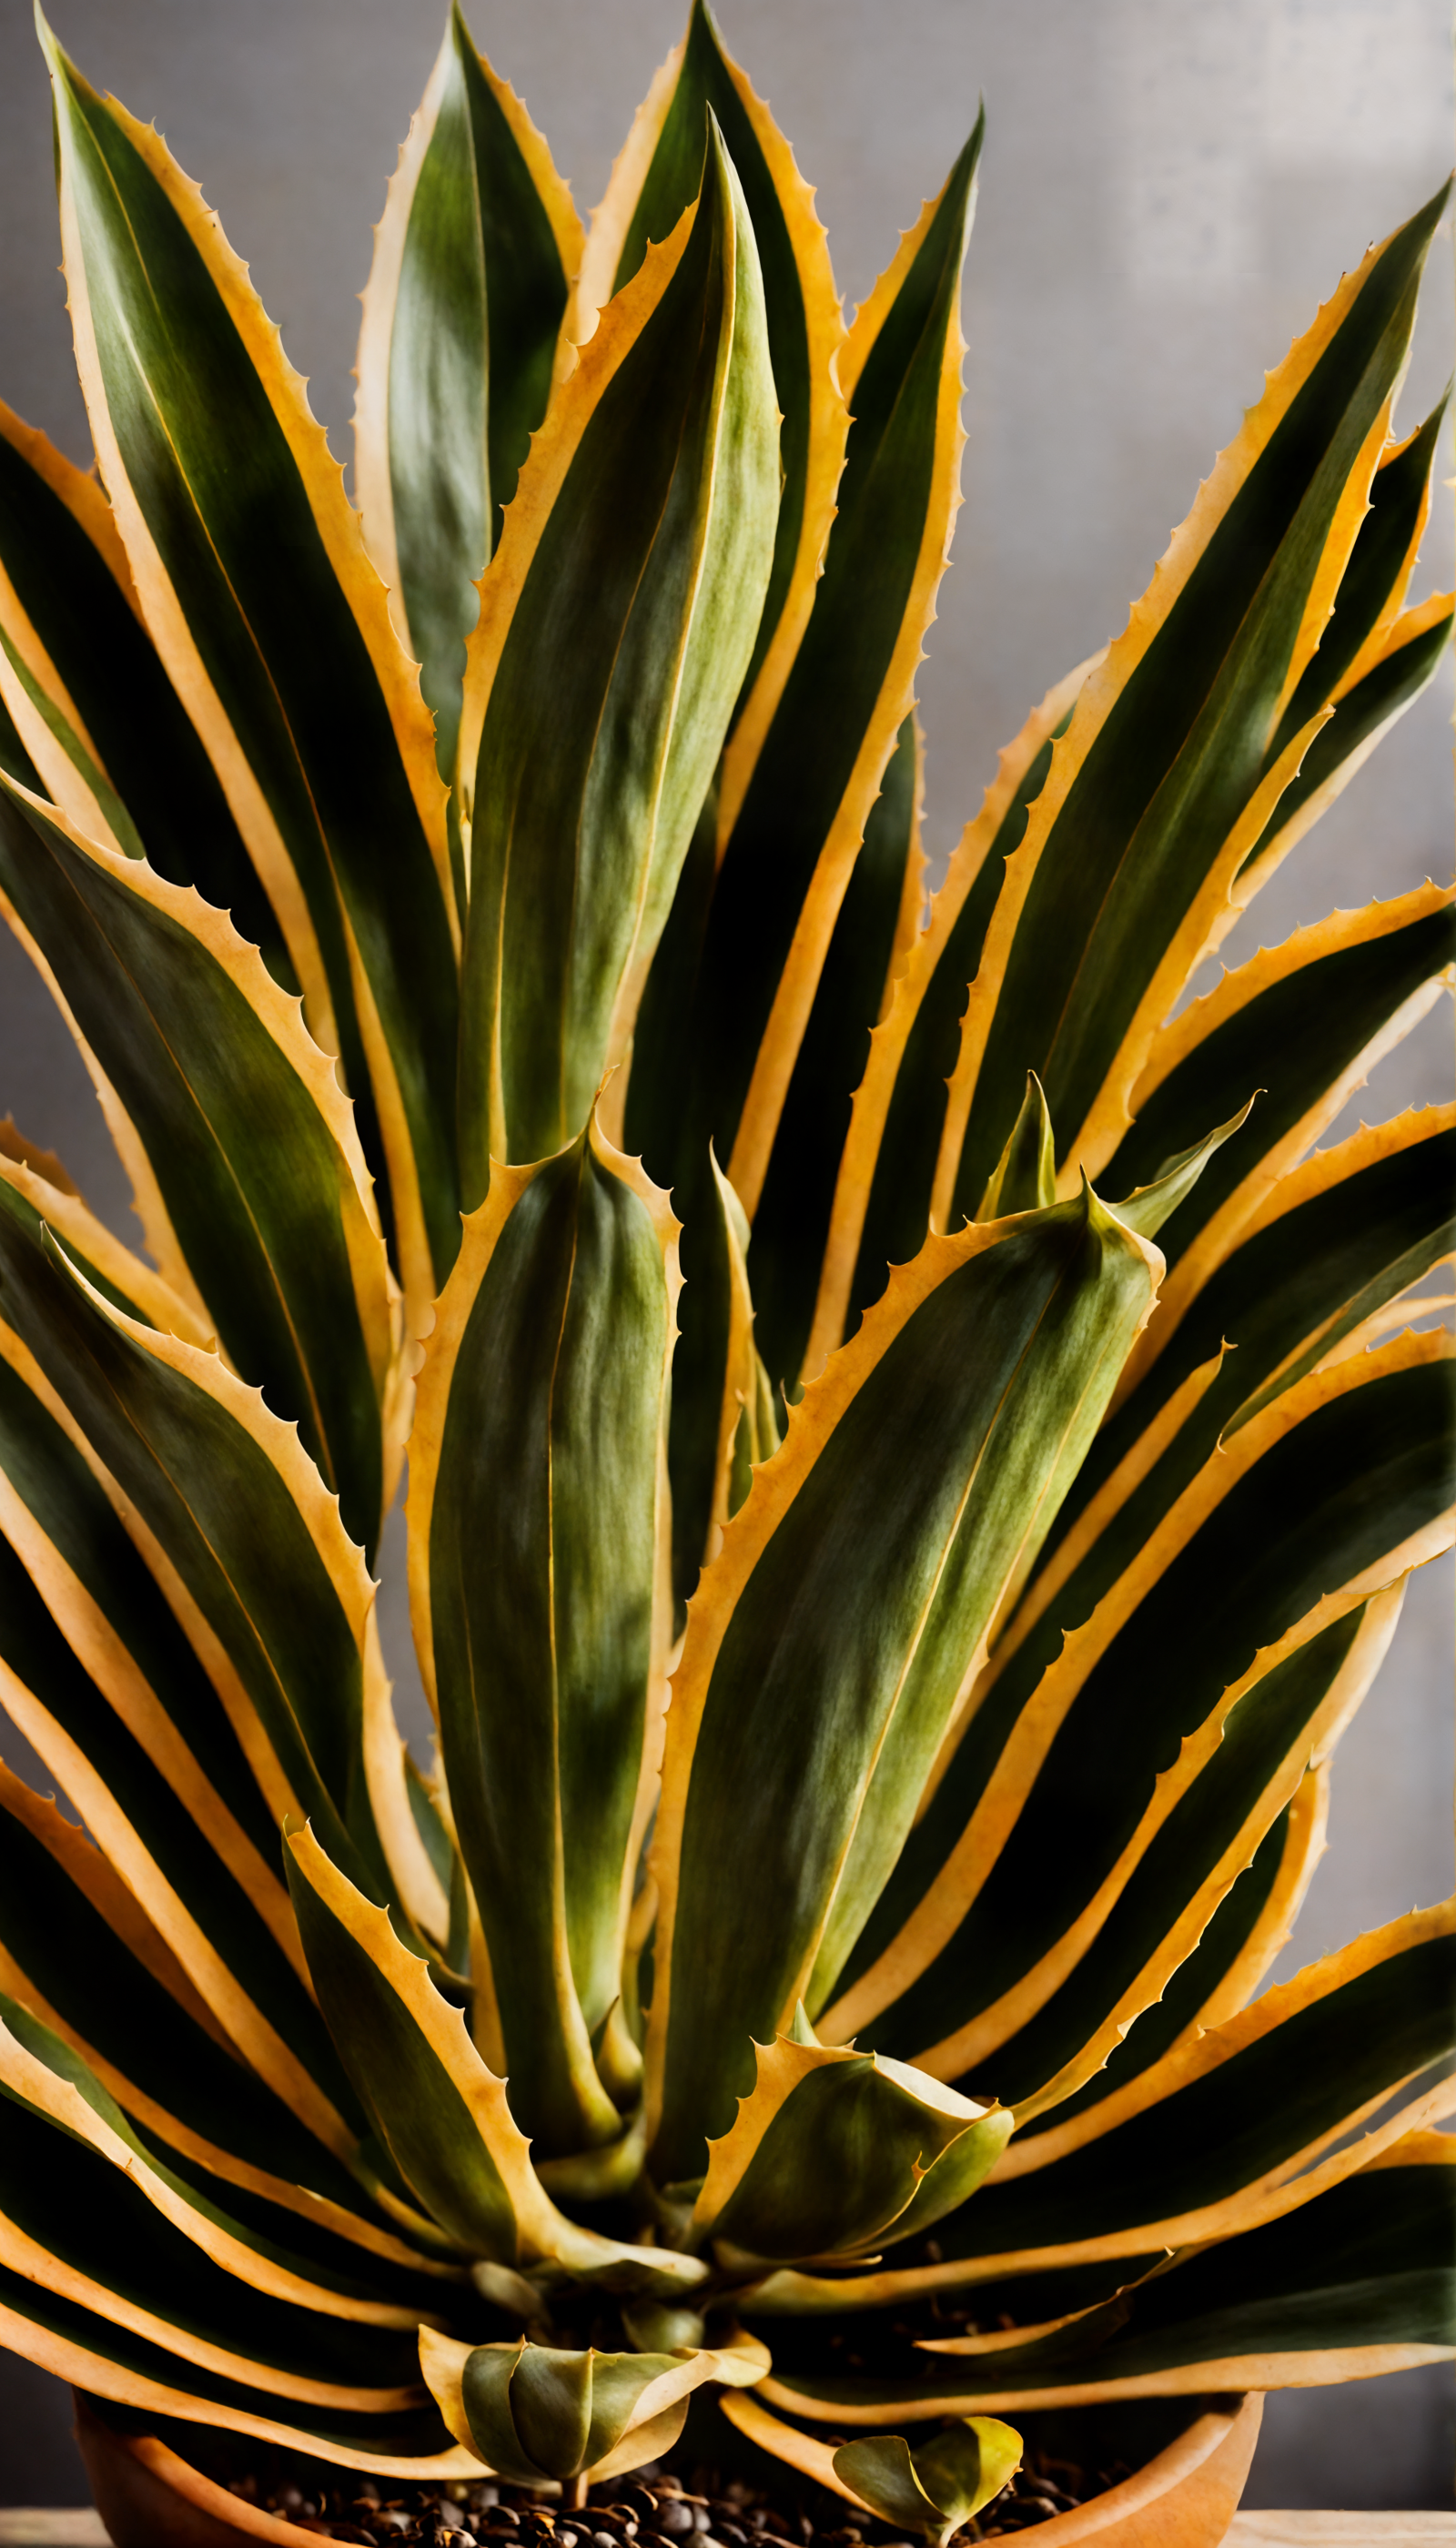 Agave americana plant with thick leaves in a planter, clear lighting, against a dark background.